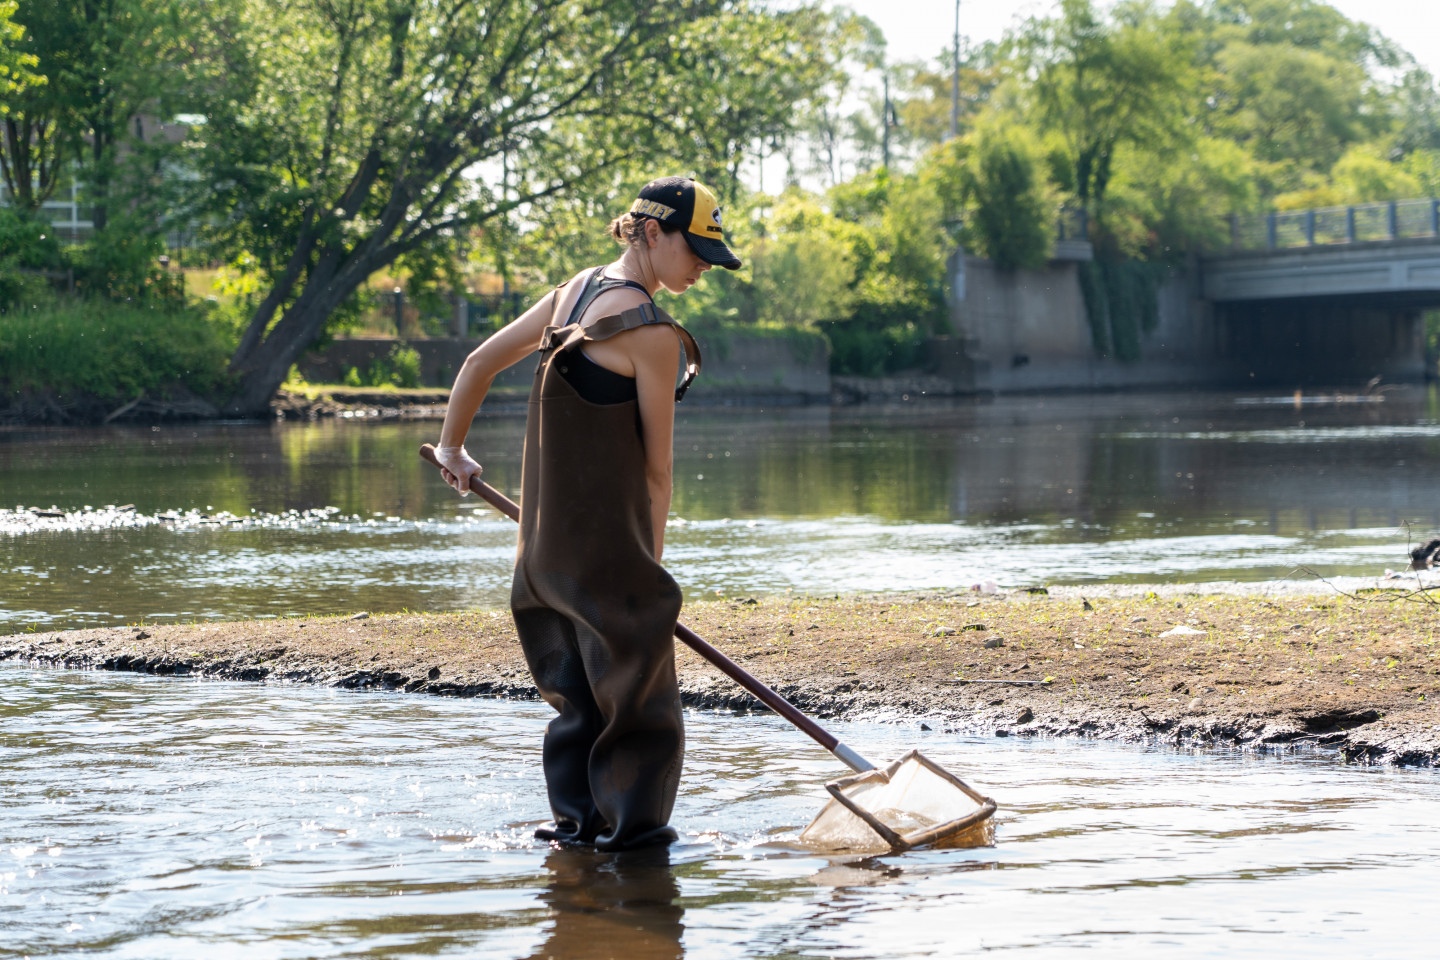 A student uses a net in the Kalamazoo river.